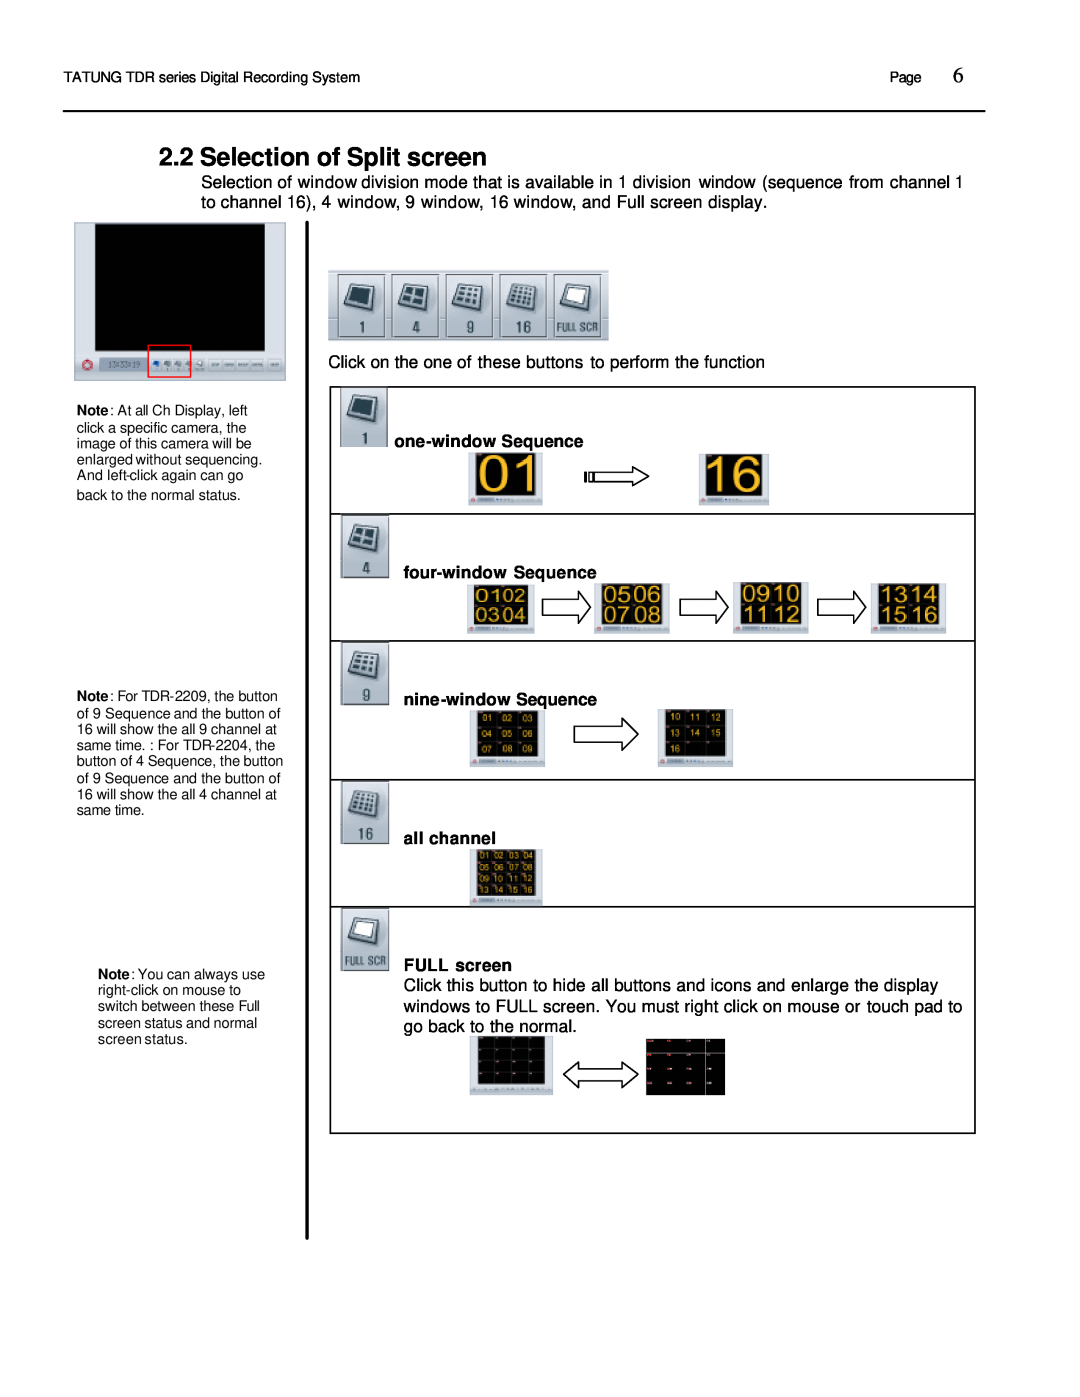 Tatung TDR-22XX operation manual Selection of Split screen, one-window Sequence four-window Sequence nine-window Sequence 